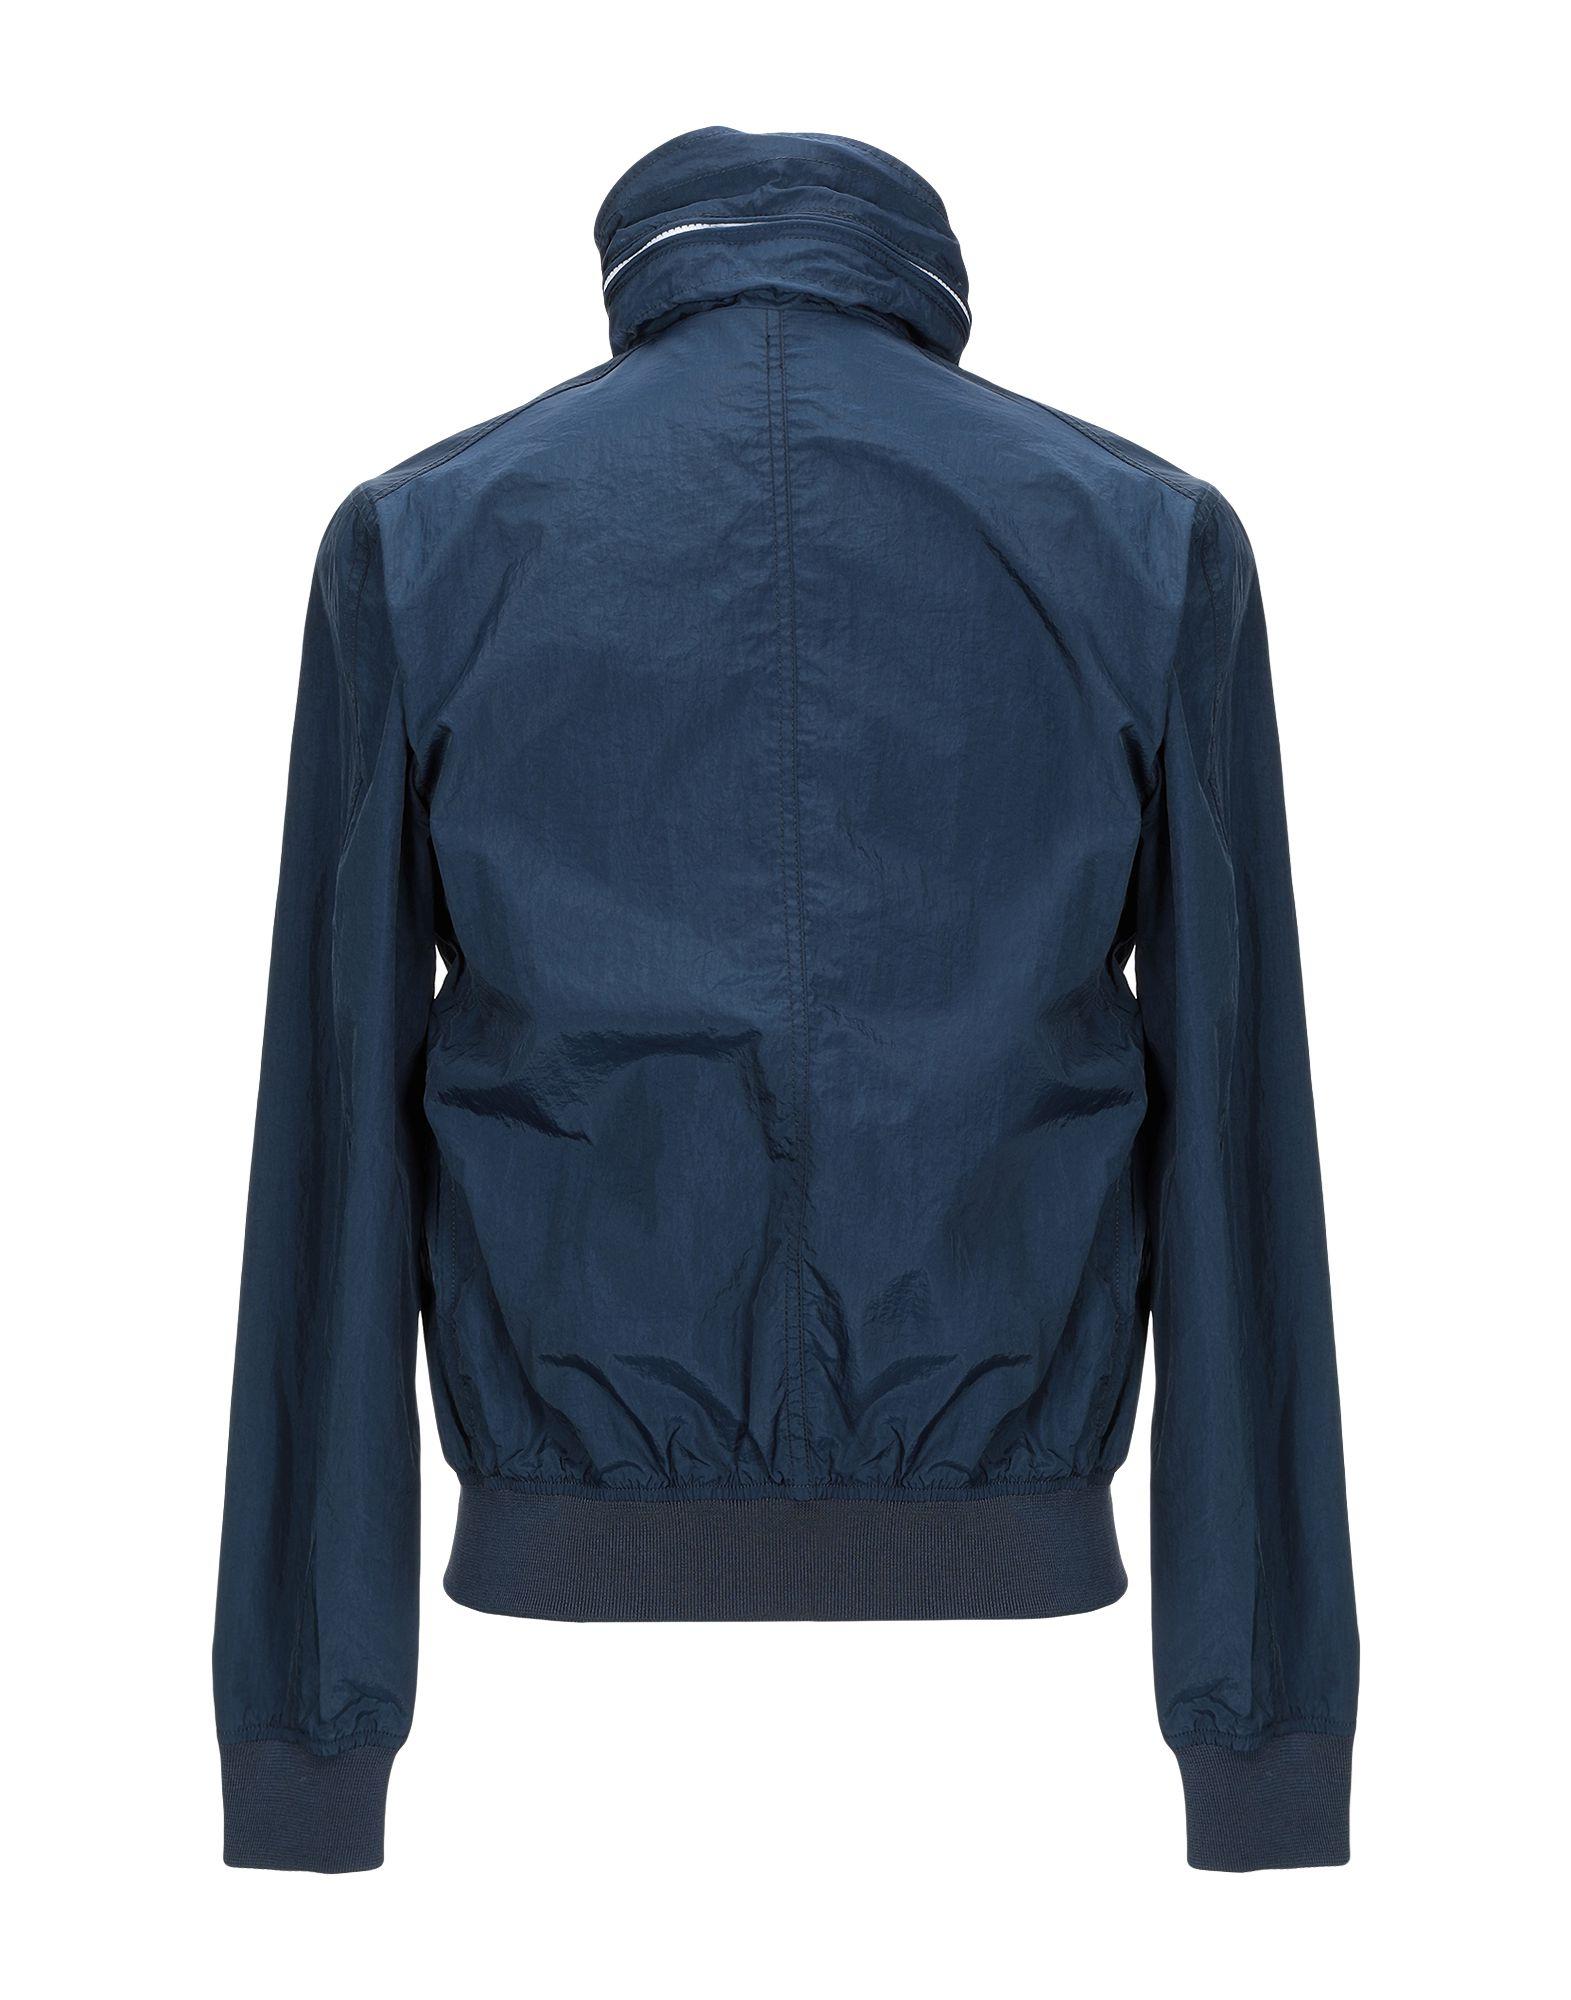 Fred Mello Synthetic Jacket in Dark Blue (Blue) for Men - Lyst